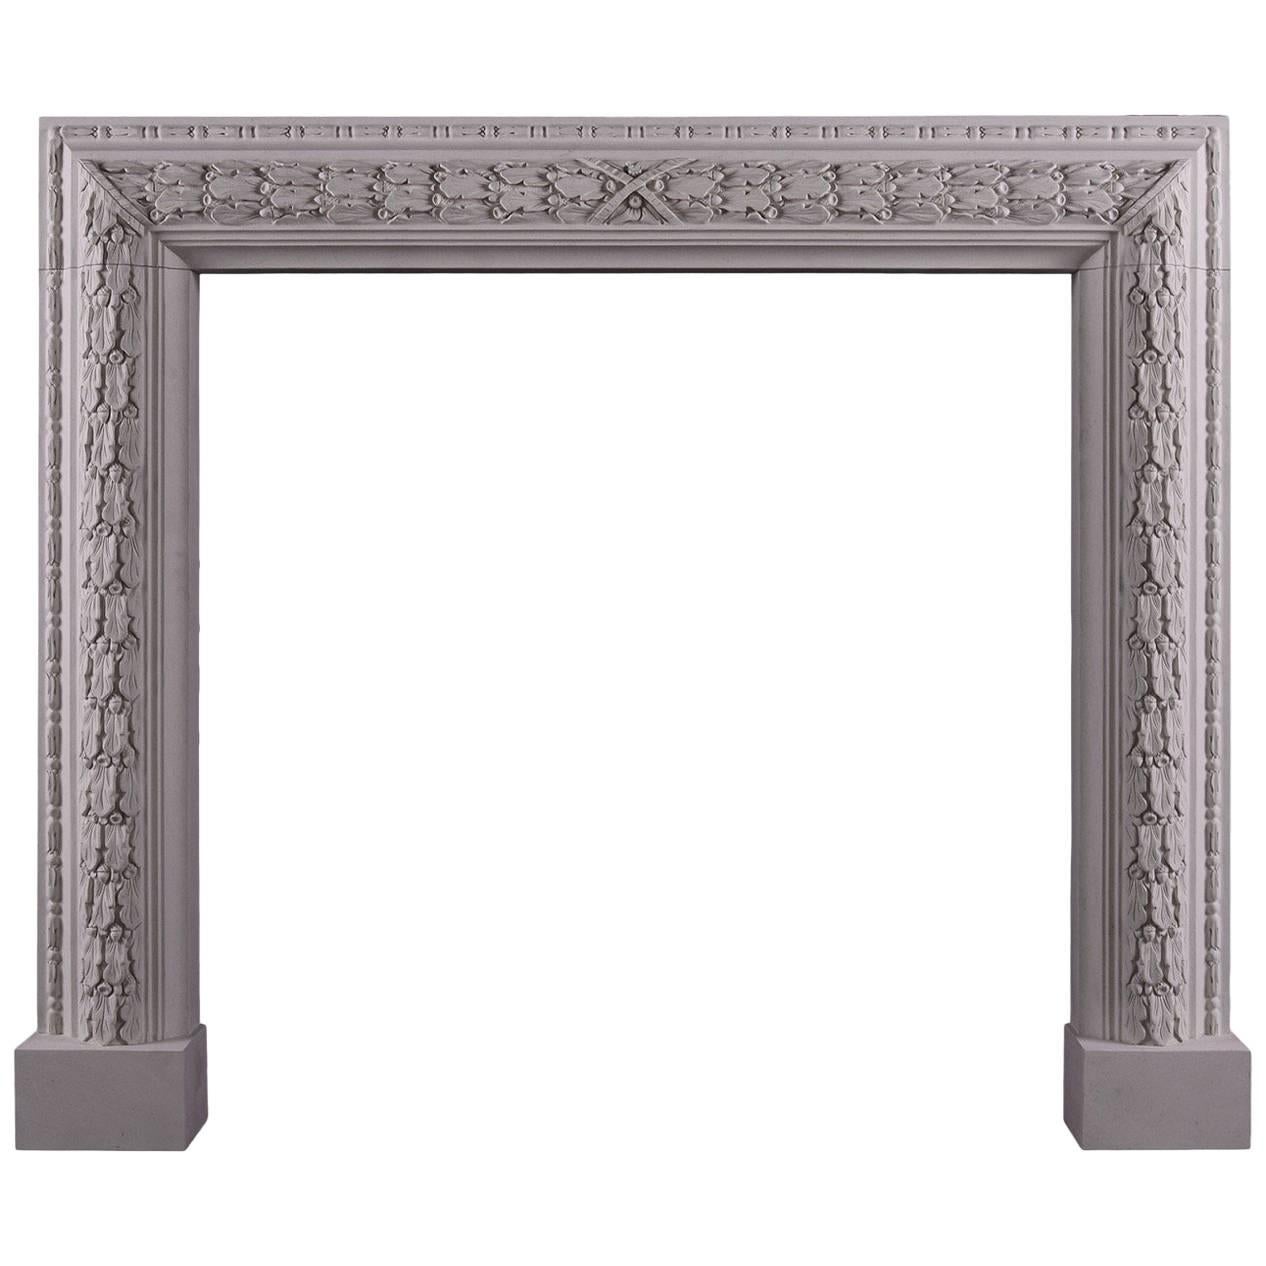 Elegant Carved Bolection Fireplace in Limestone For Sale